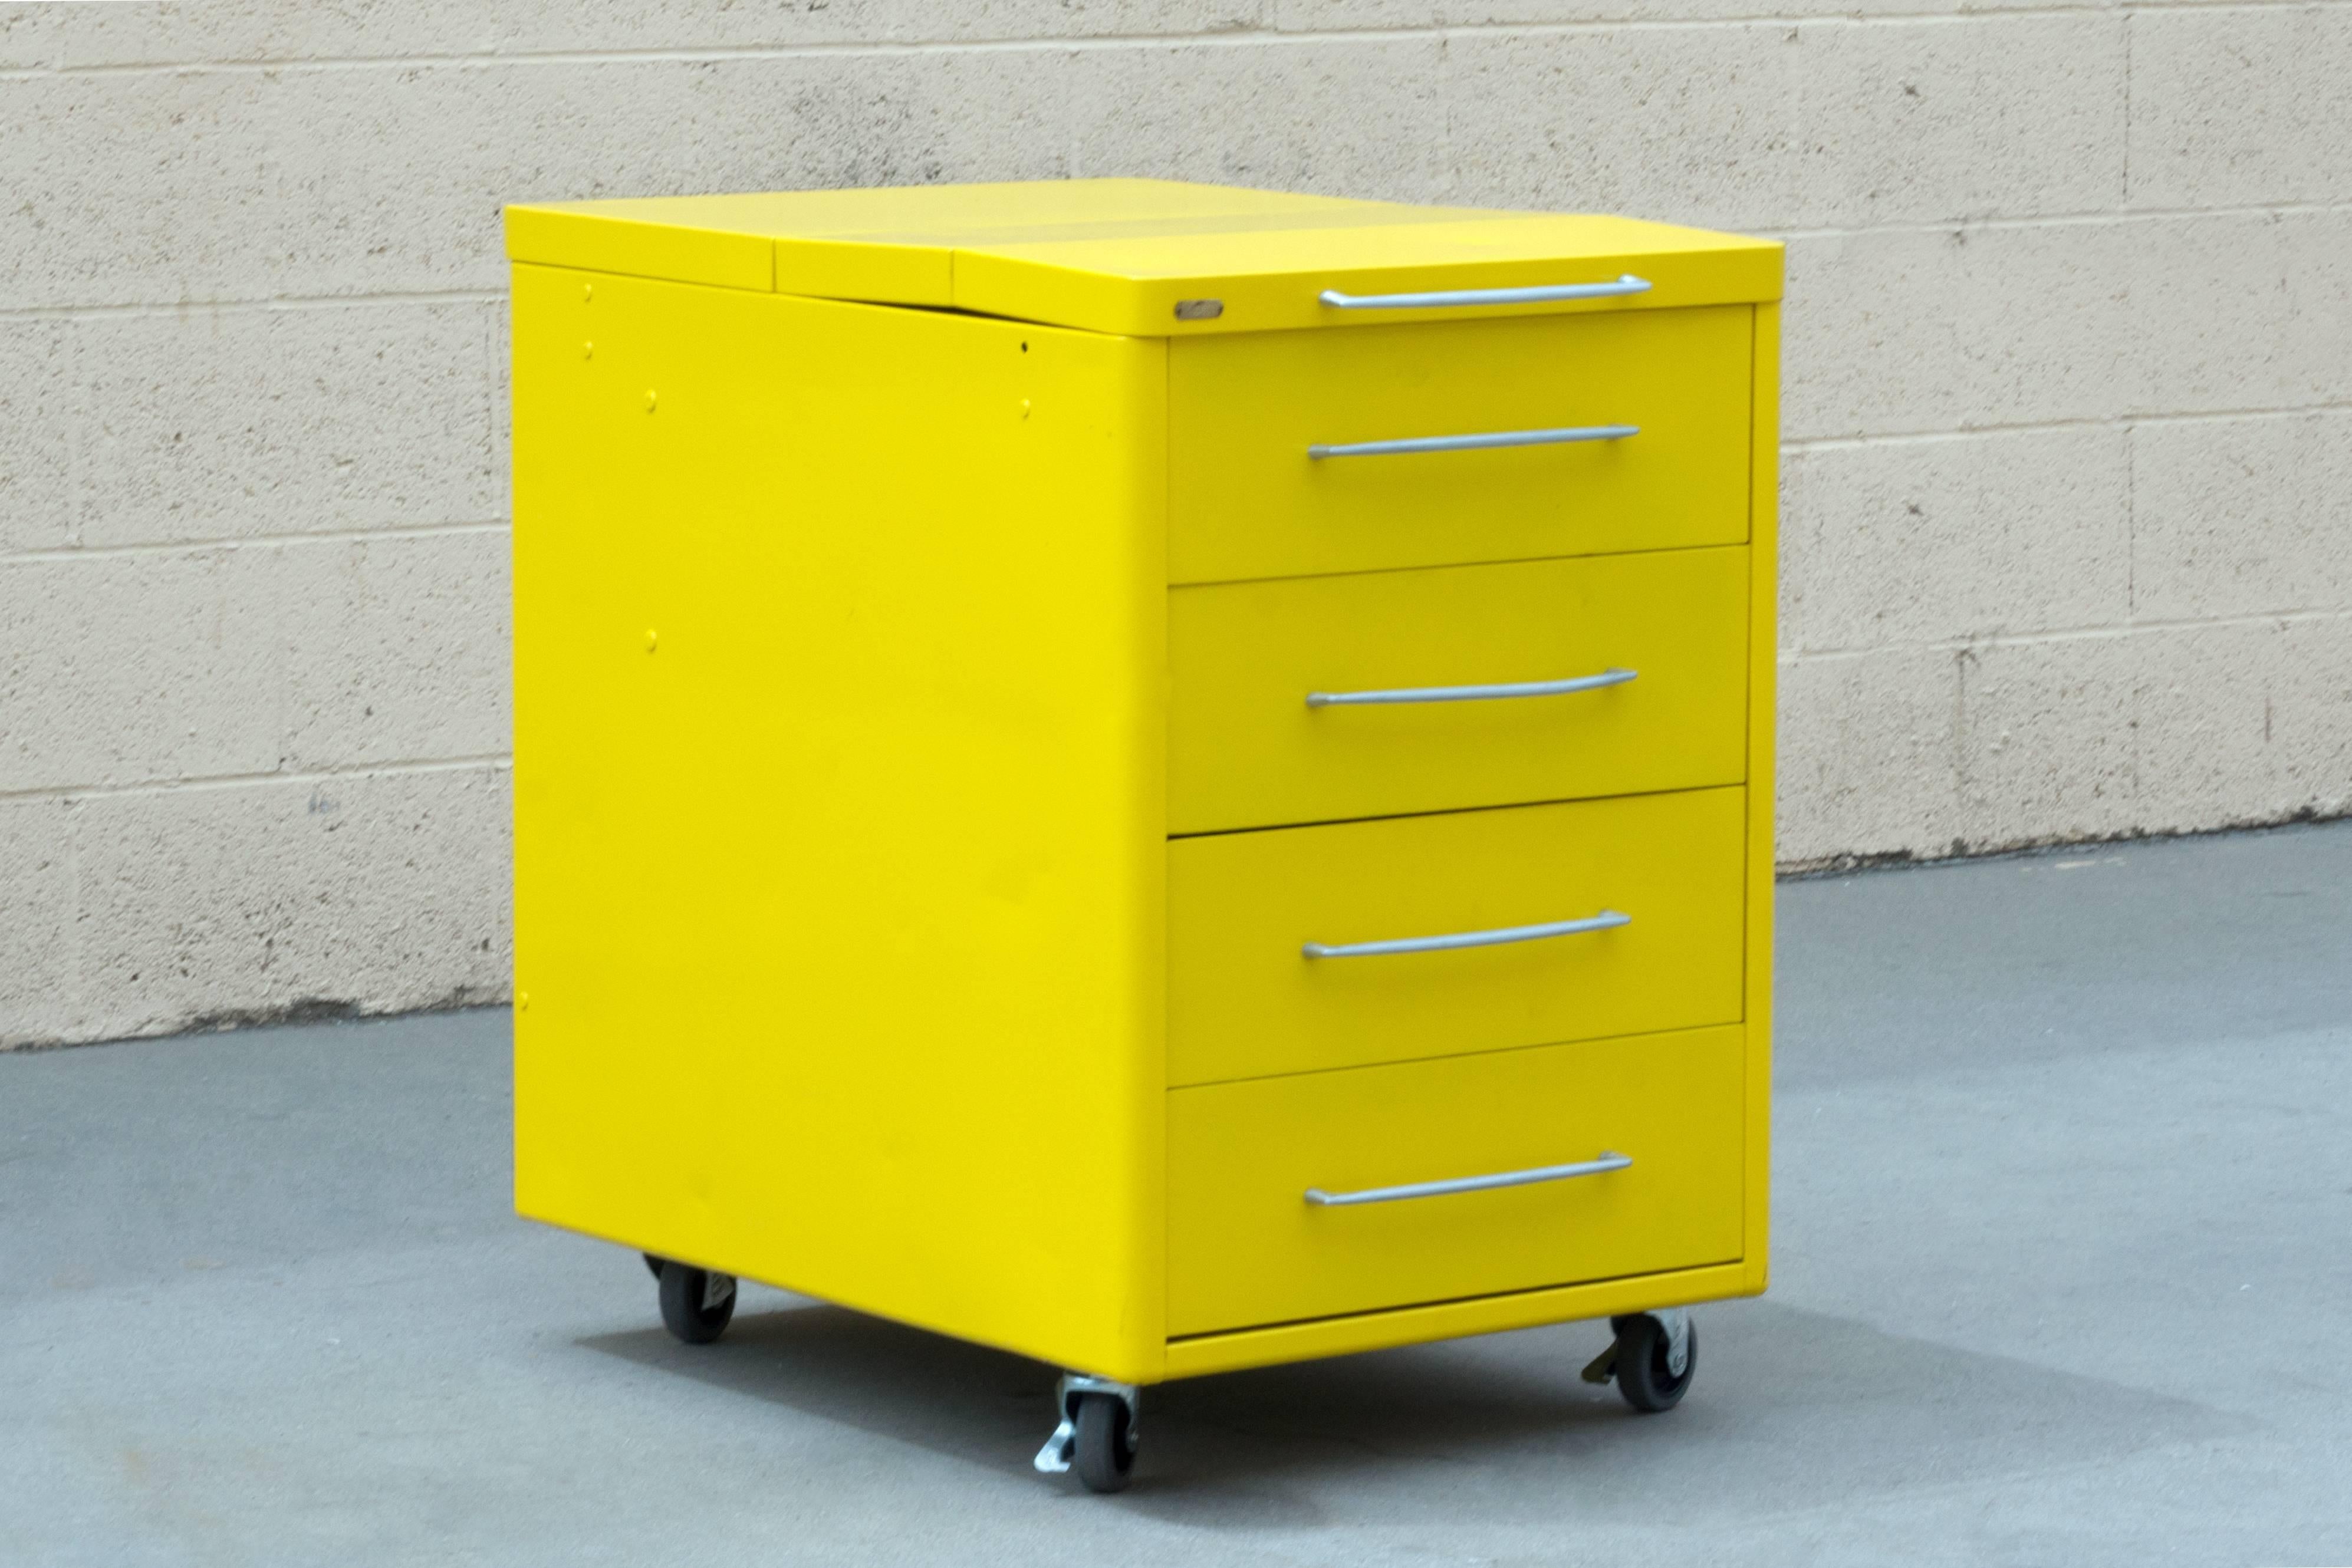 1950s industrial workshop cabinets refinished in gloss Sunshine Yellow. We have two cabinets that are almost identical. They are uniquely designed to function as a convertible flip-top tool box and storage unit in one. Featuring locking casters and